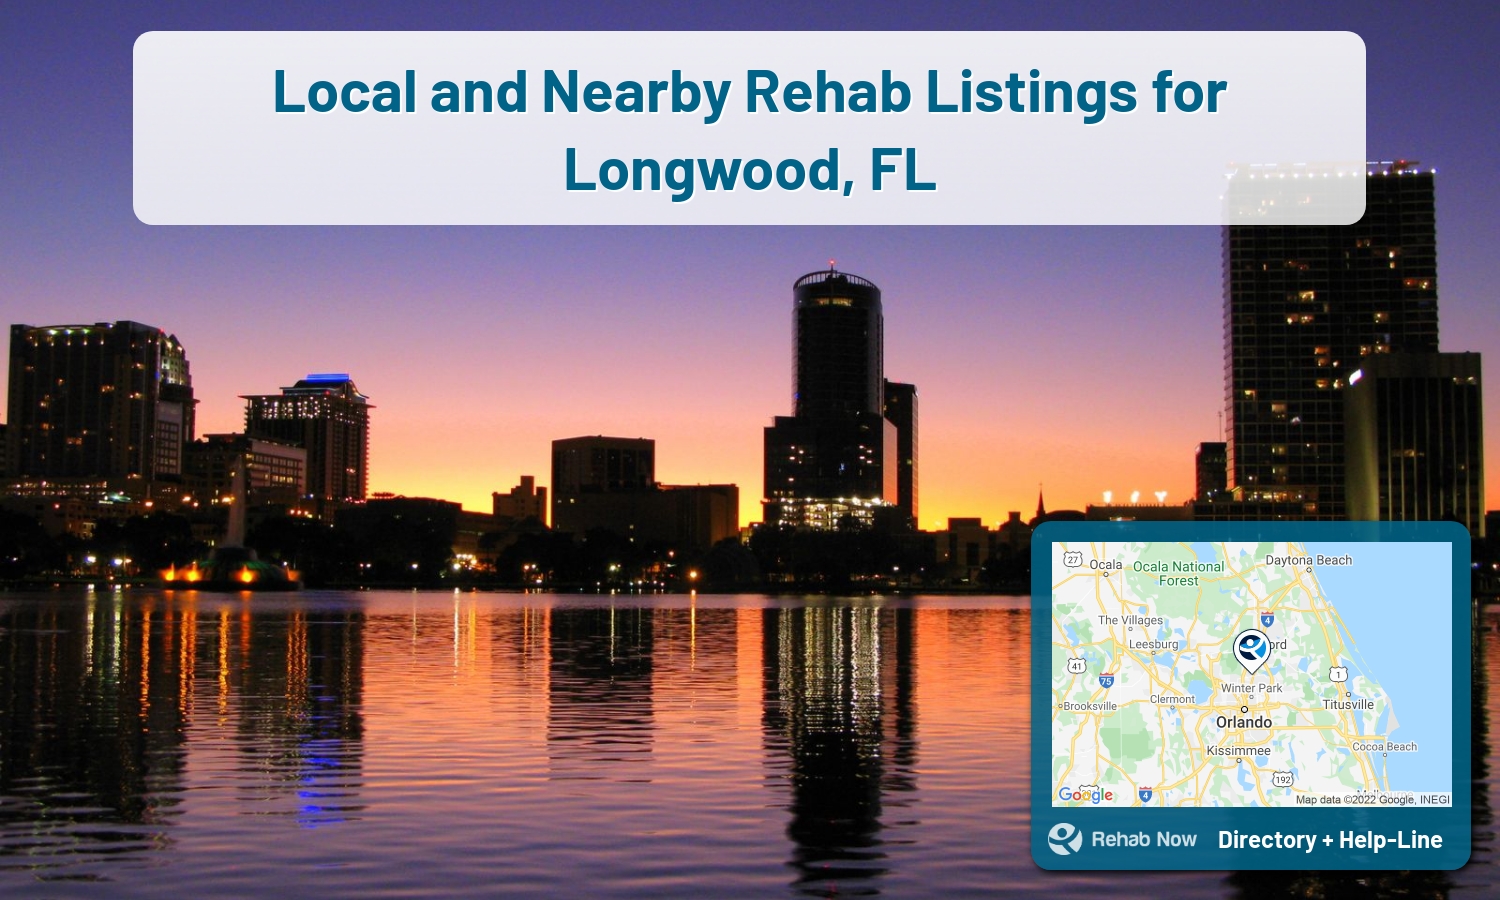 View options, availability, treatment methods, and more, for drug rehab and alcohol treatment in Longwood, Florida